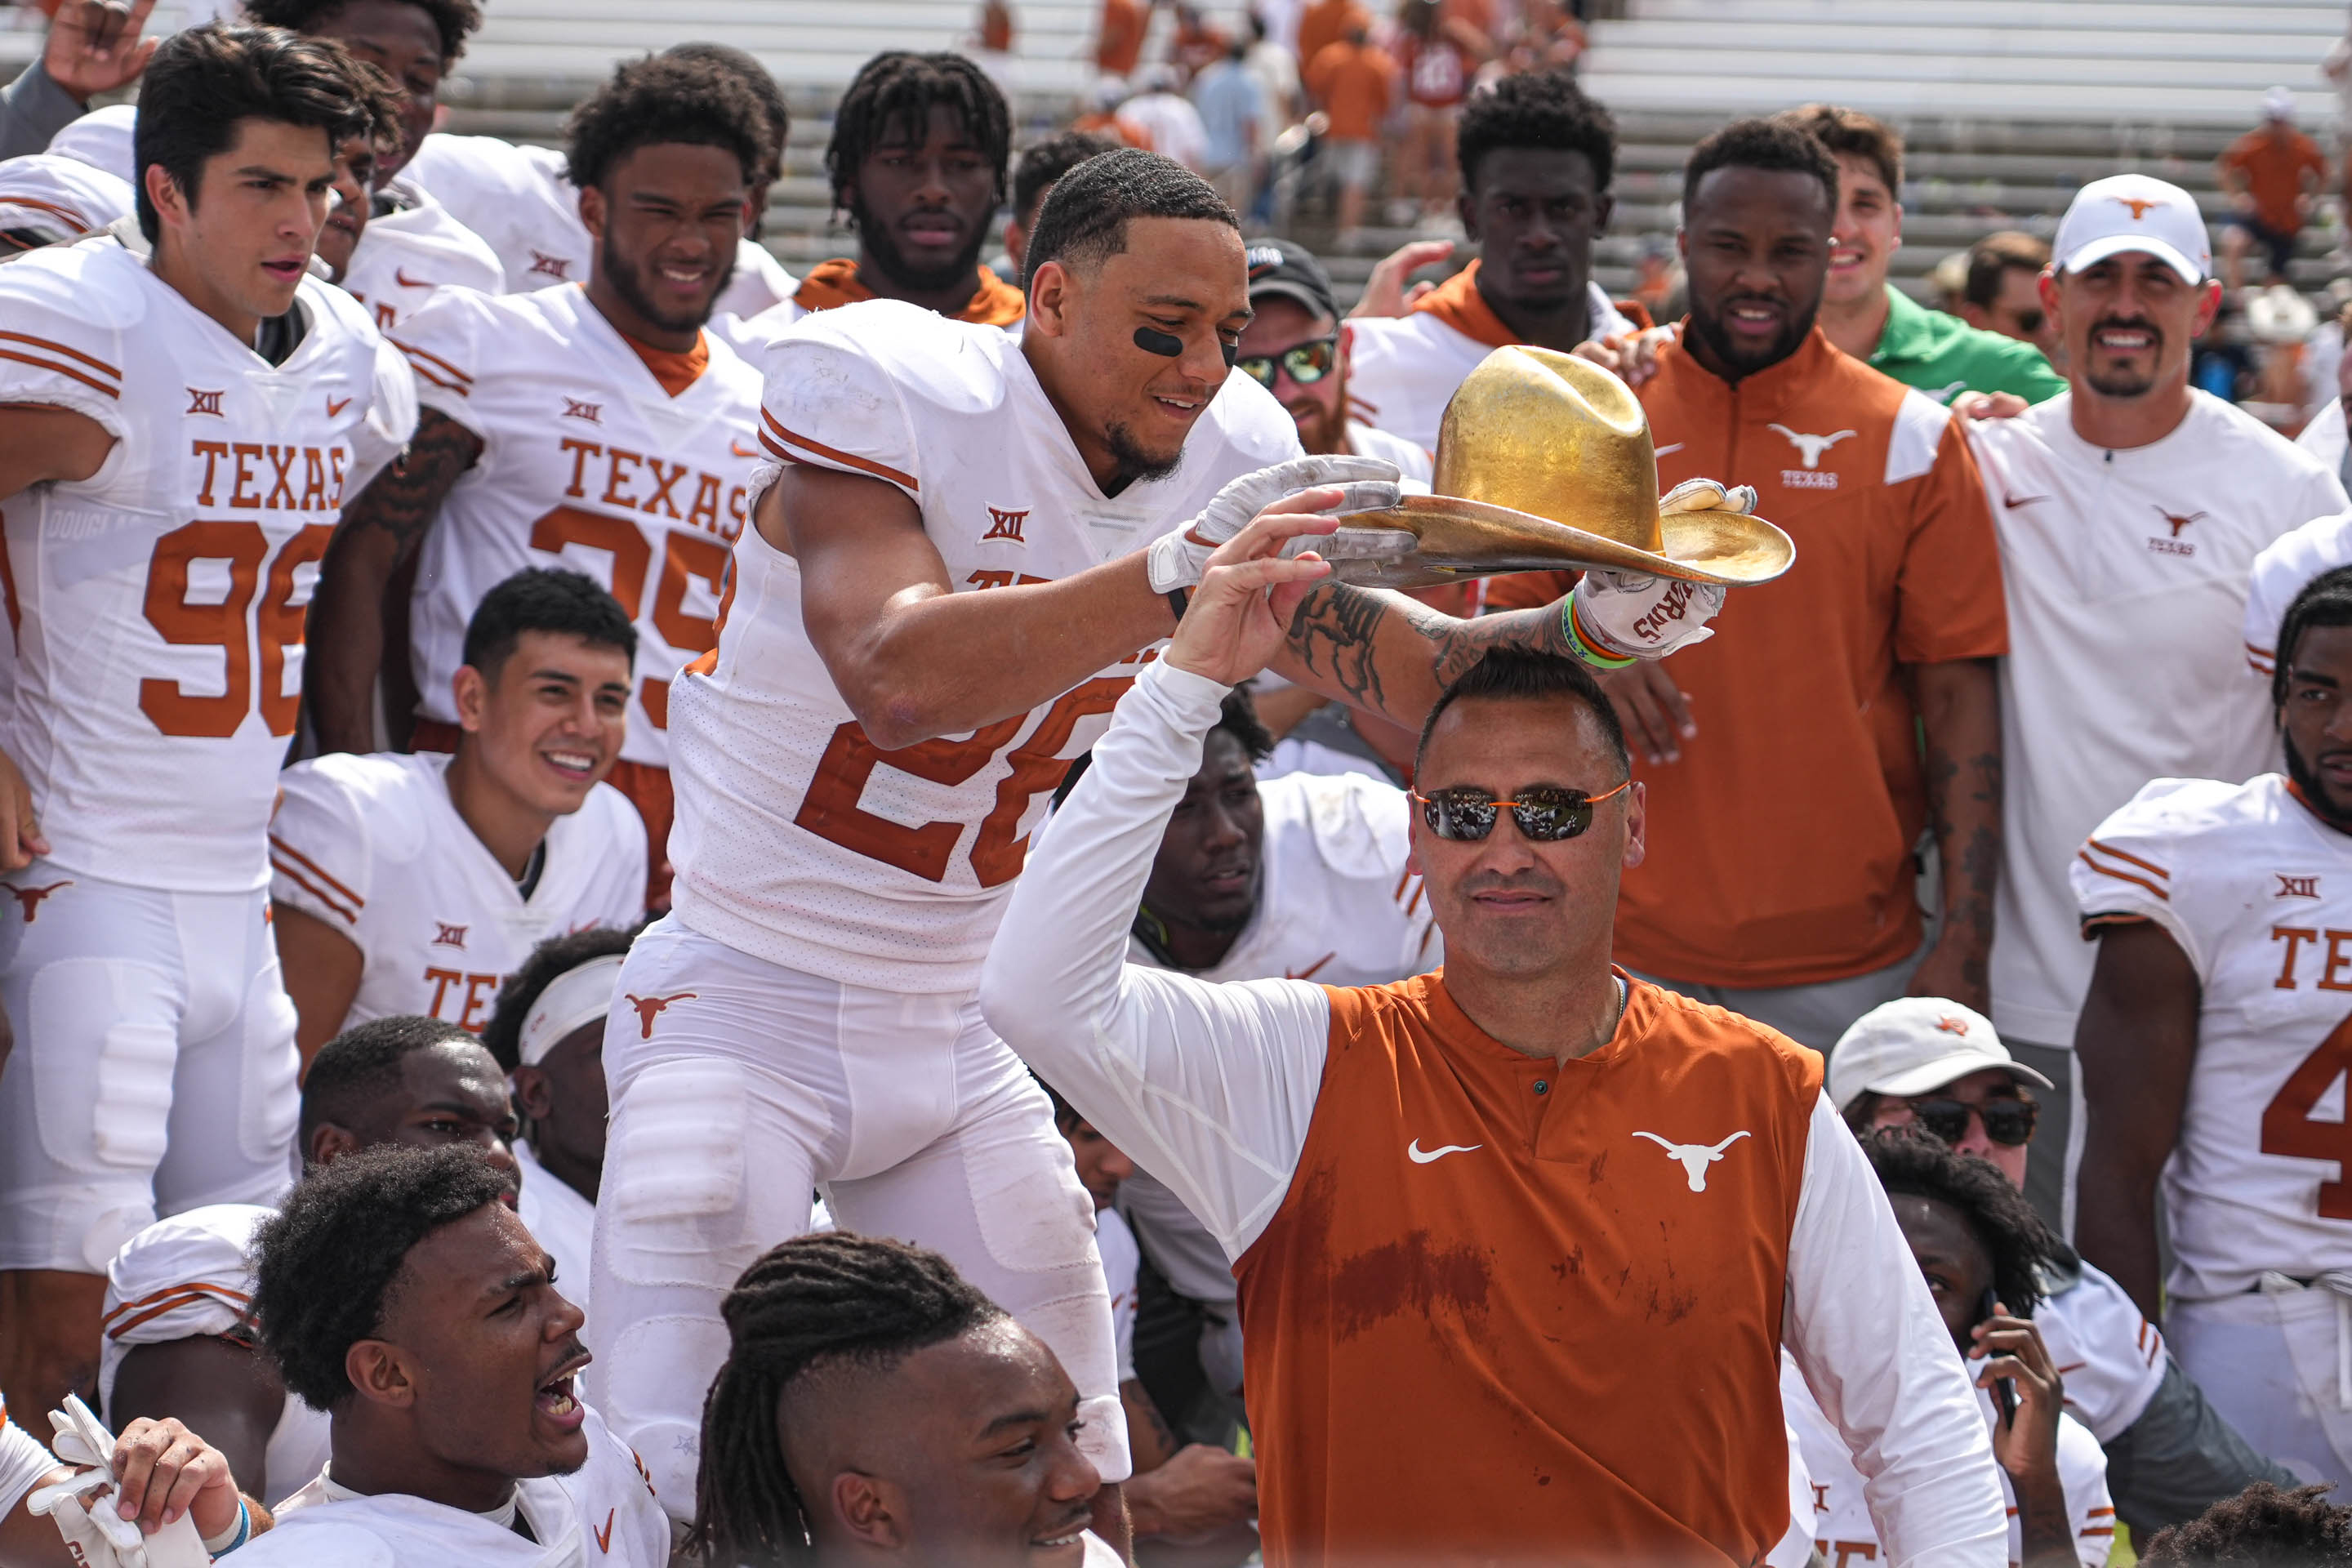 Dallas, Texas, USA: Texas Longhorns Longhorns defensive back Derrin Thompson (28) places the Golden Hat on the head of head coach Steve Sarkisian after a 49-0 victory over the Oklahoma Sooners